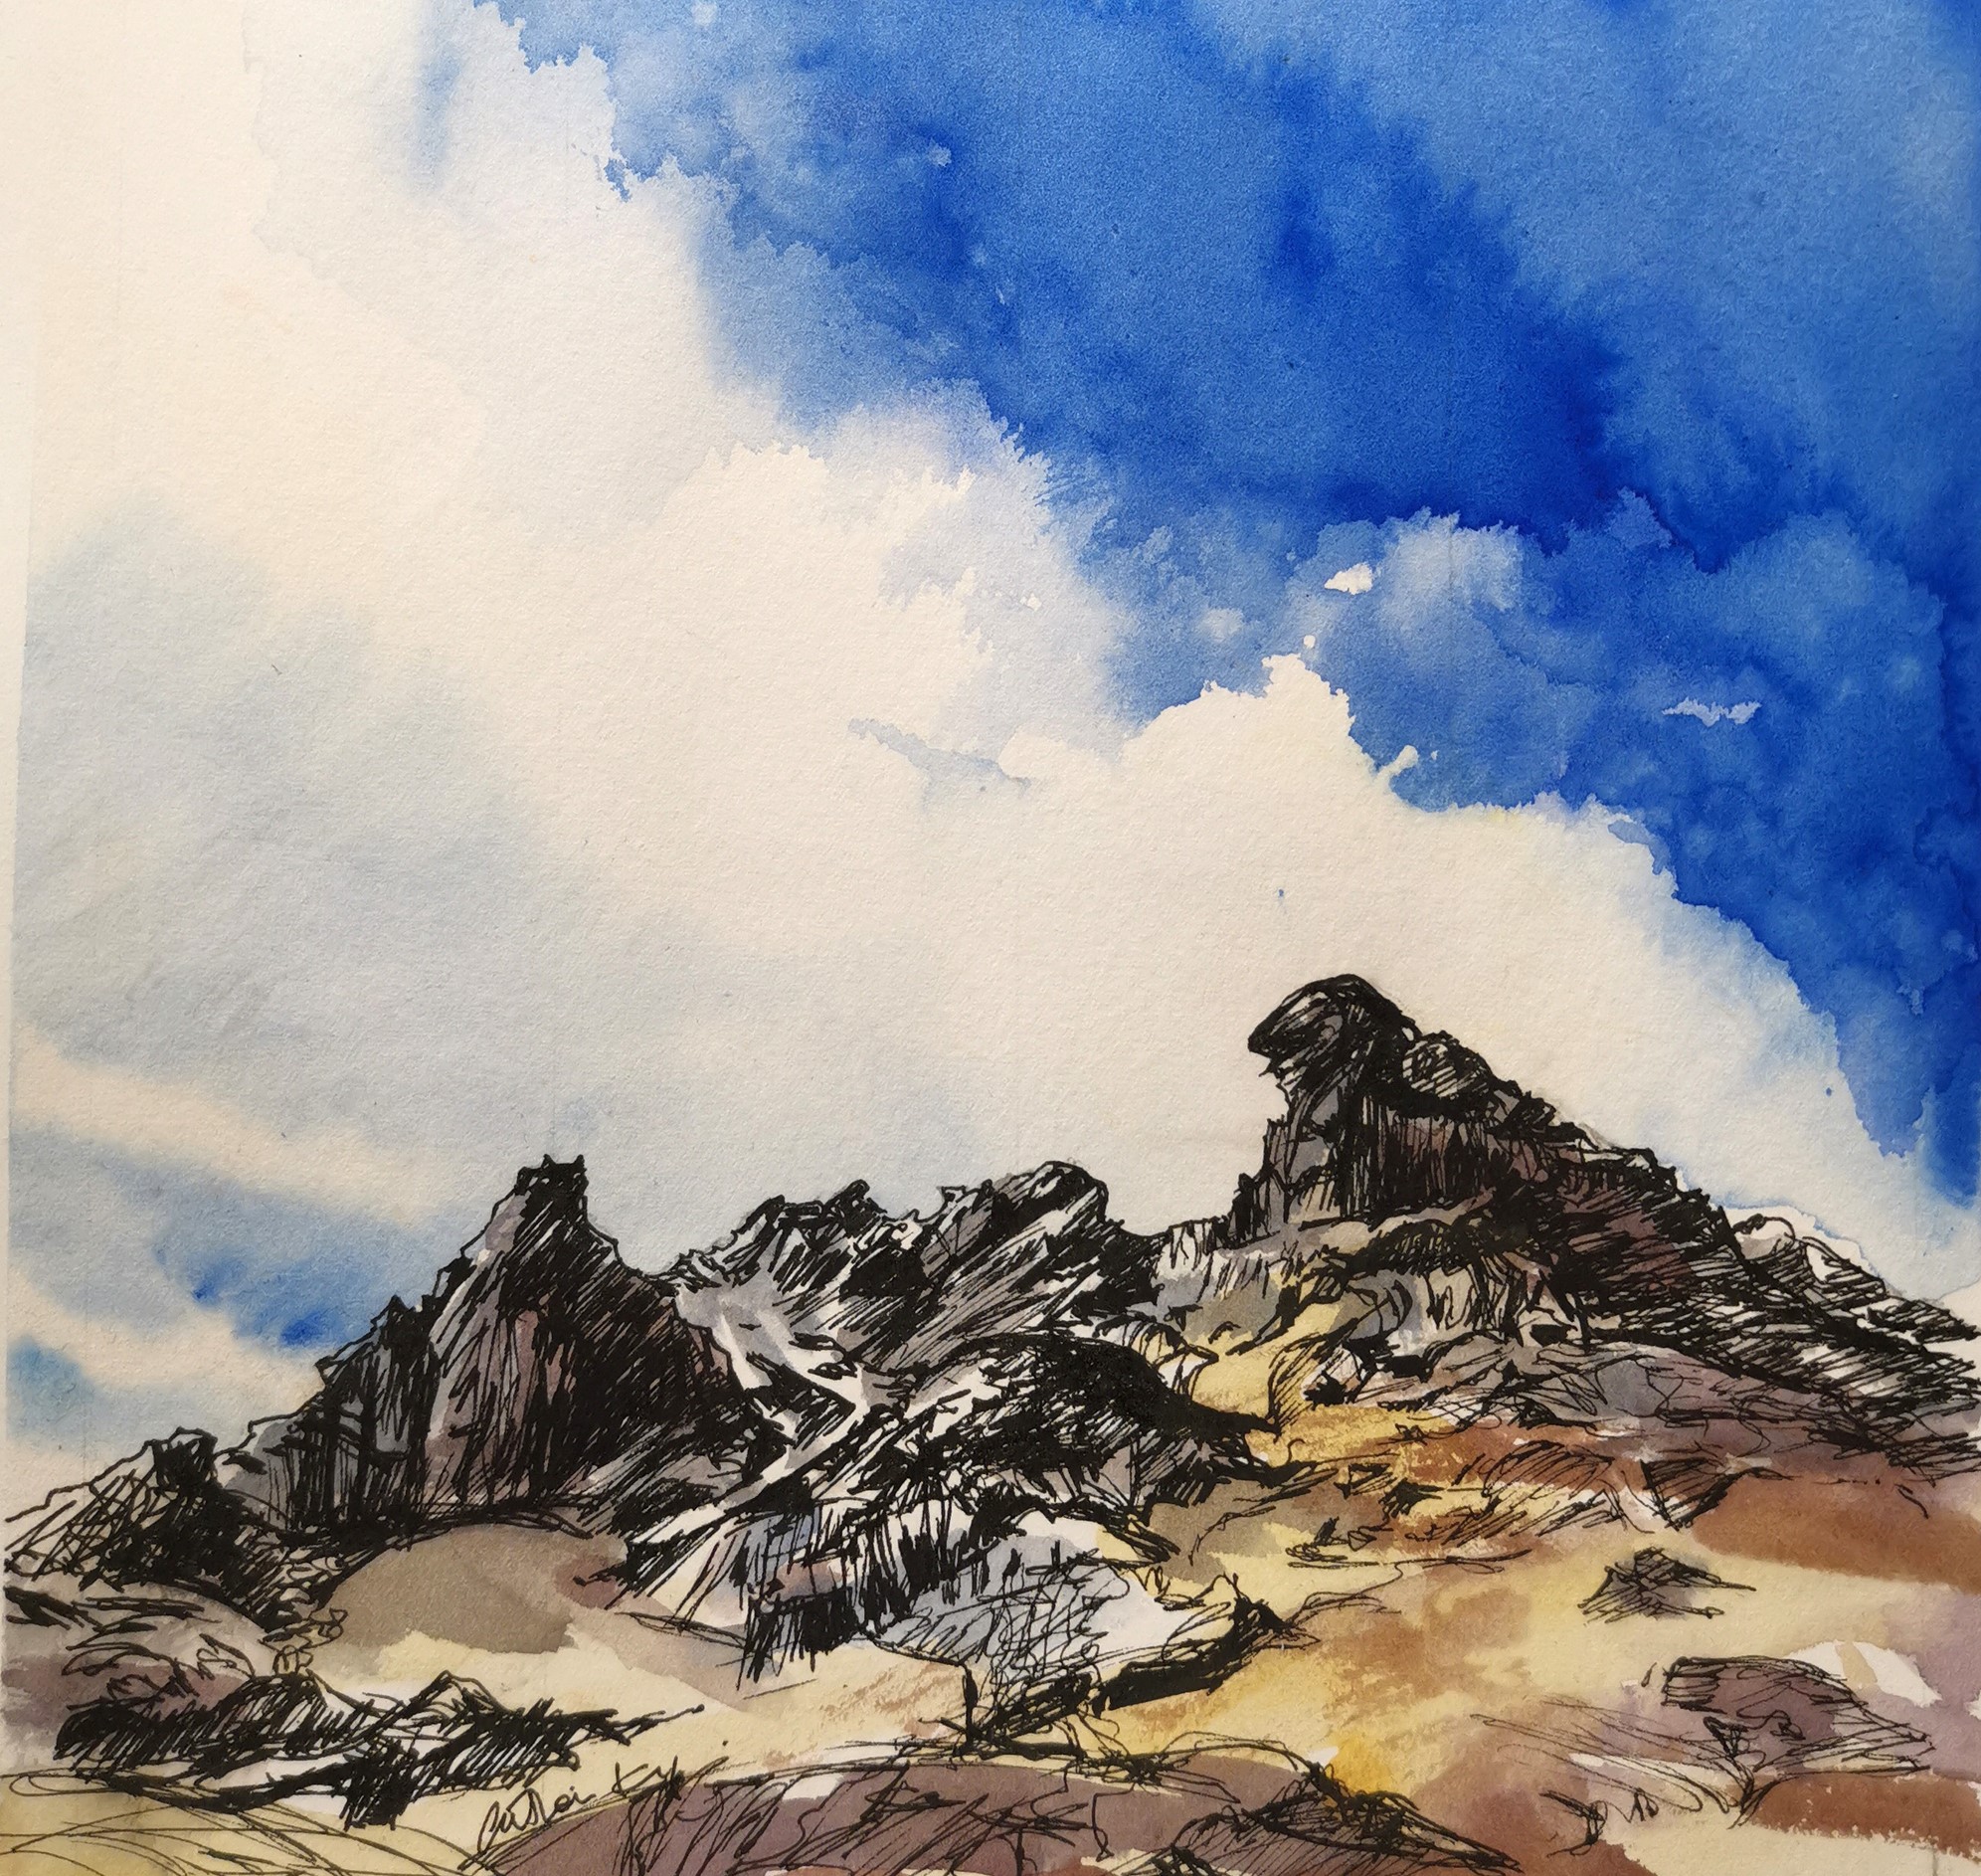 'The Cobbler' by artist Catherine King